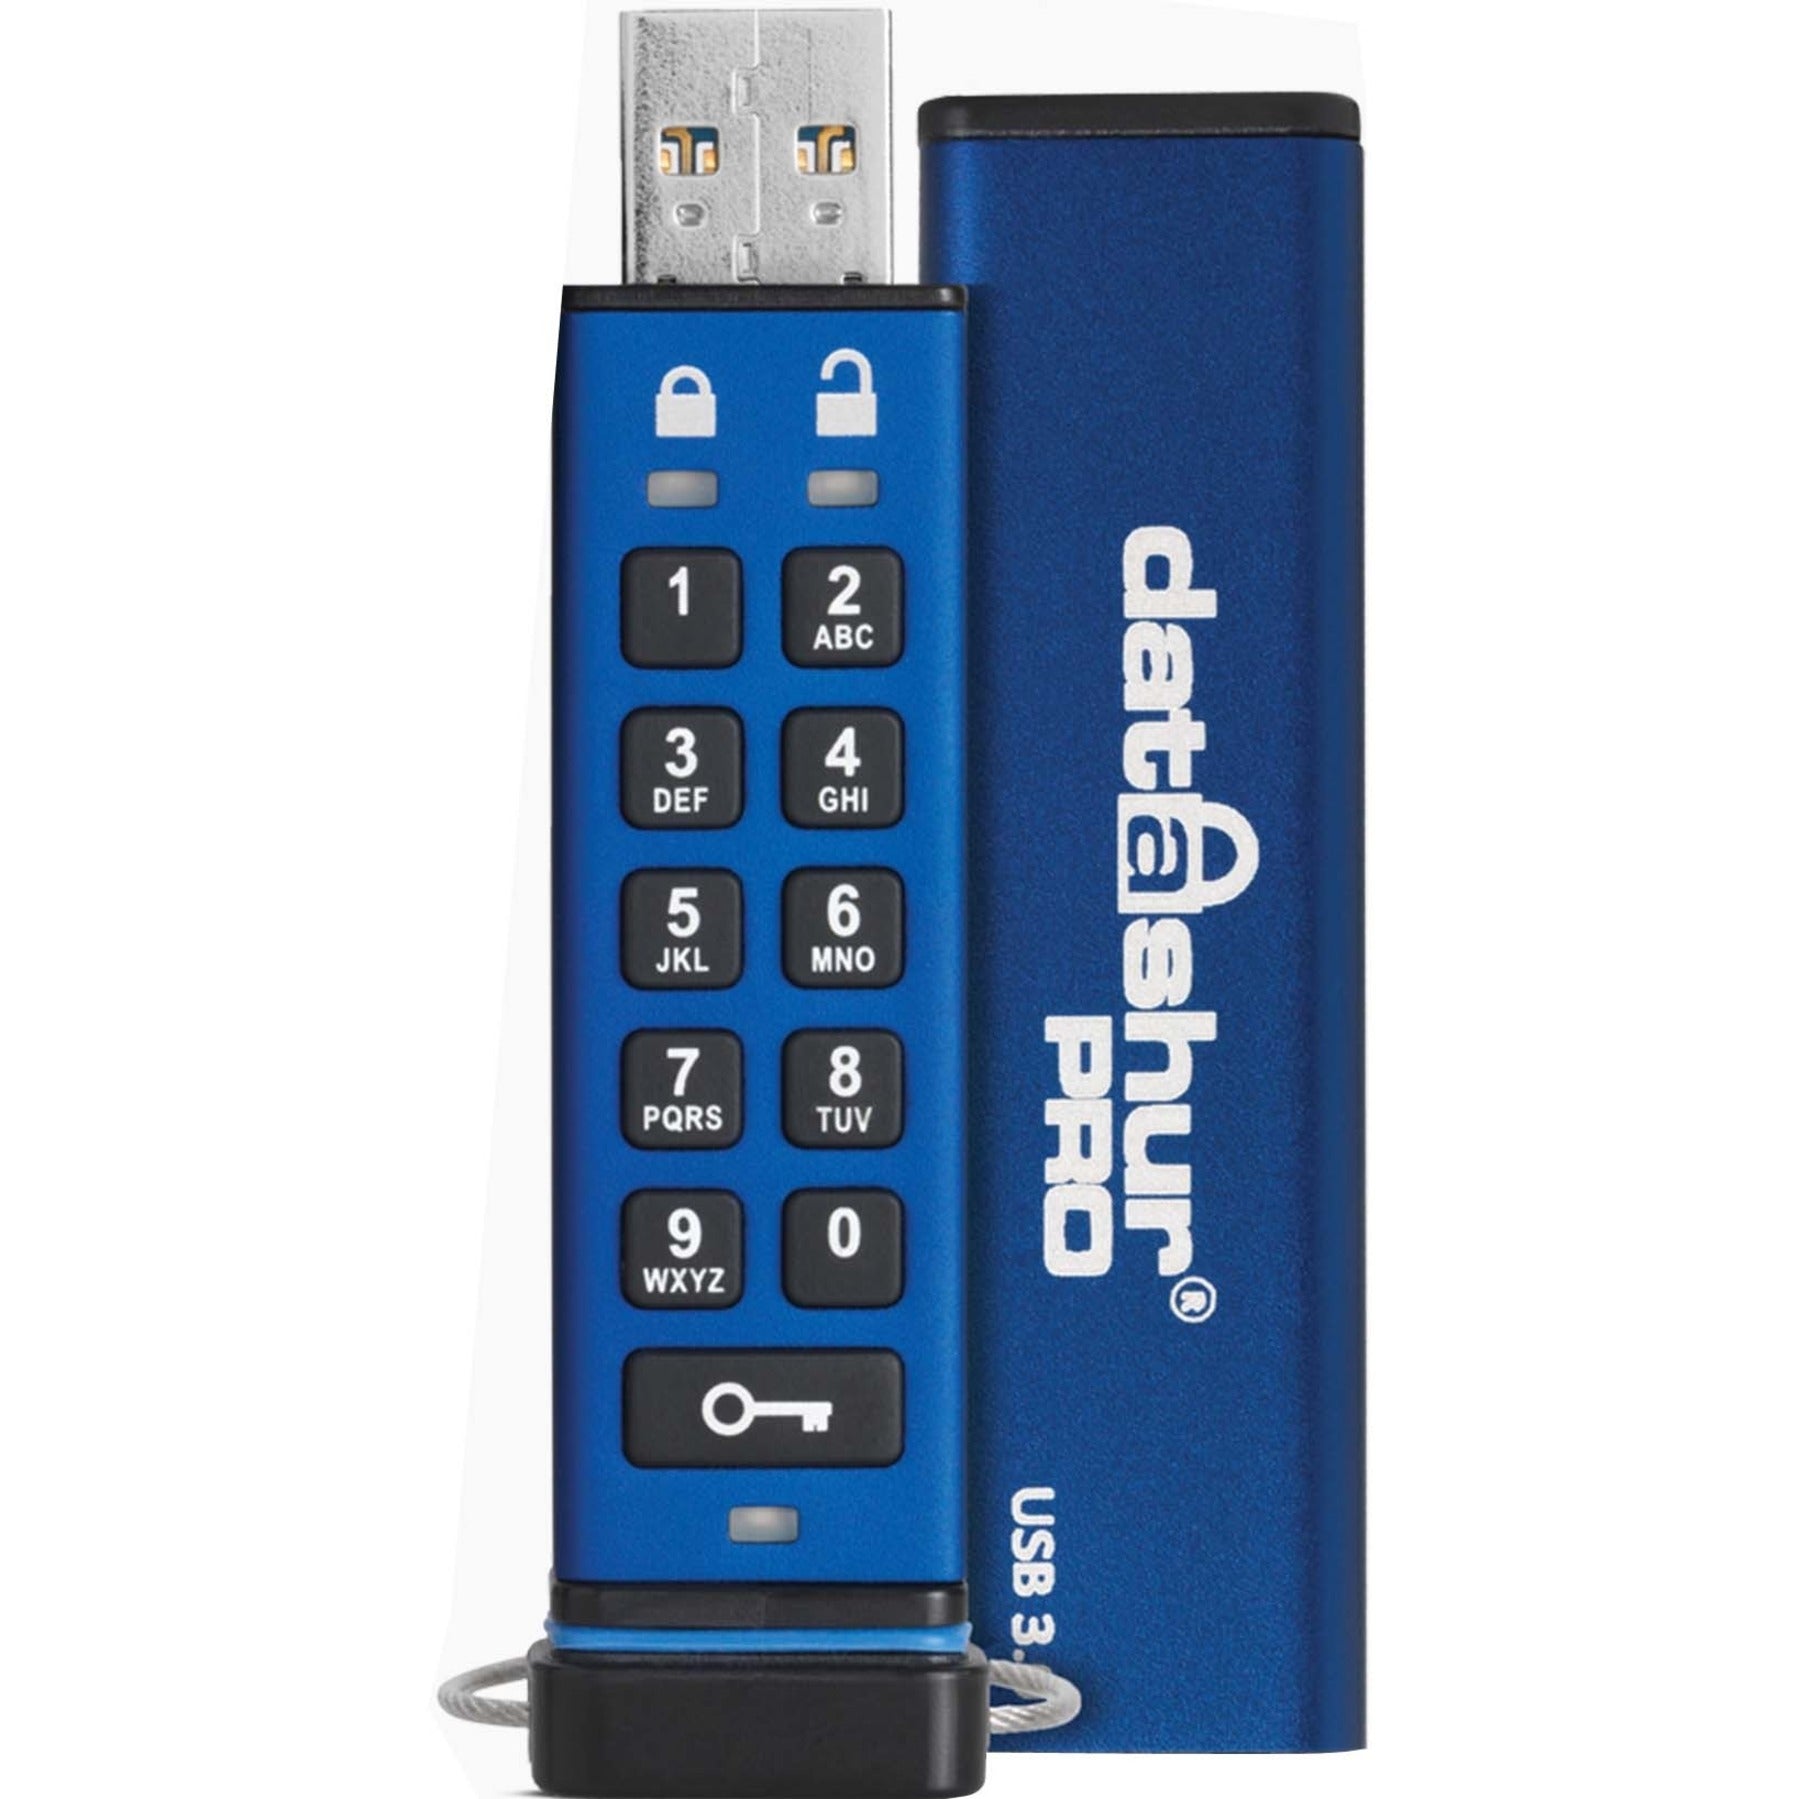 iStorage IS-FL-DA3-256-32 datAshur PRO 32GB USB 3.2 (Gen 1) Type A Flash Drive, Secure, FIPS 140-2 Level 3 Certified, Password Protected, Dust/Water Resistant